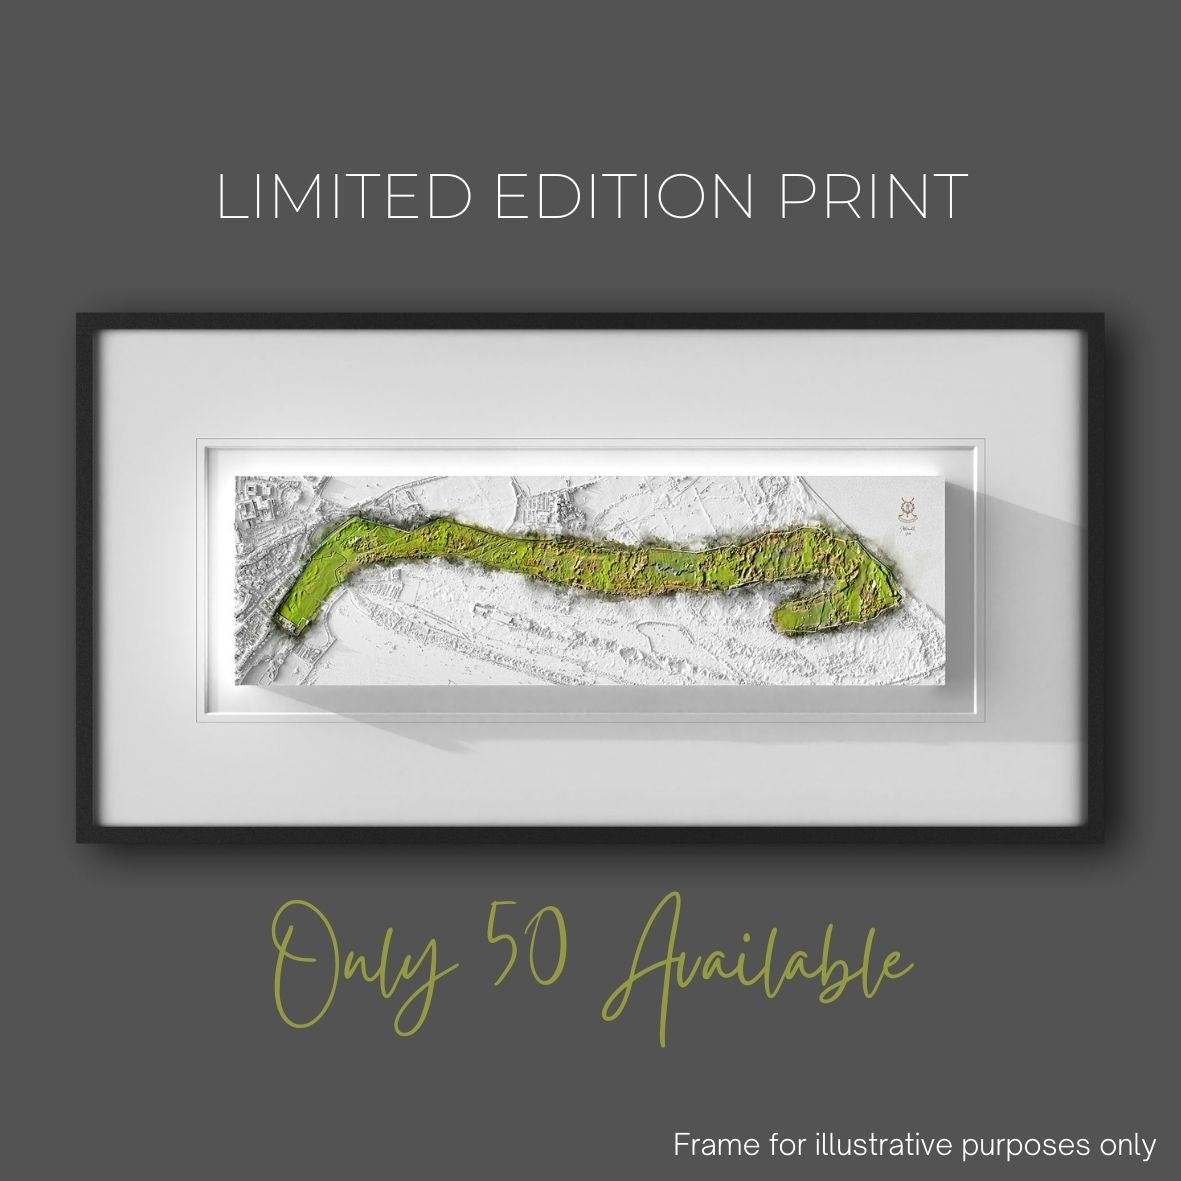 limited edition st andrews 3D print for 150th open